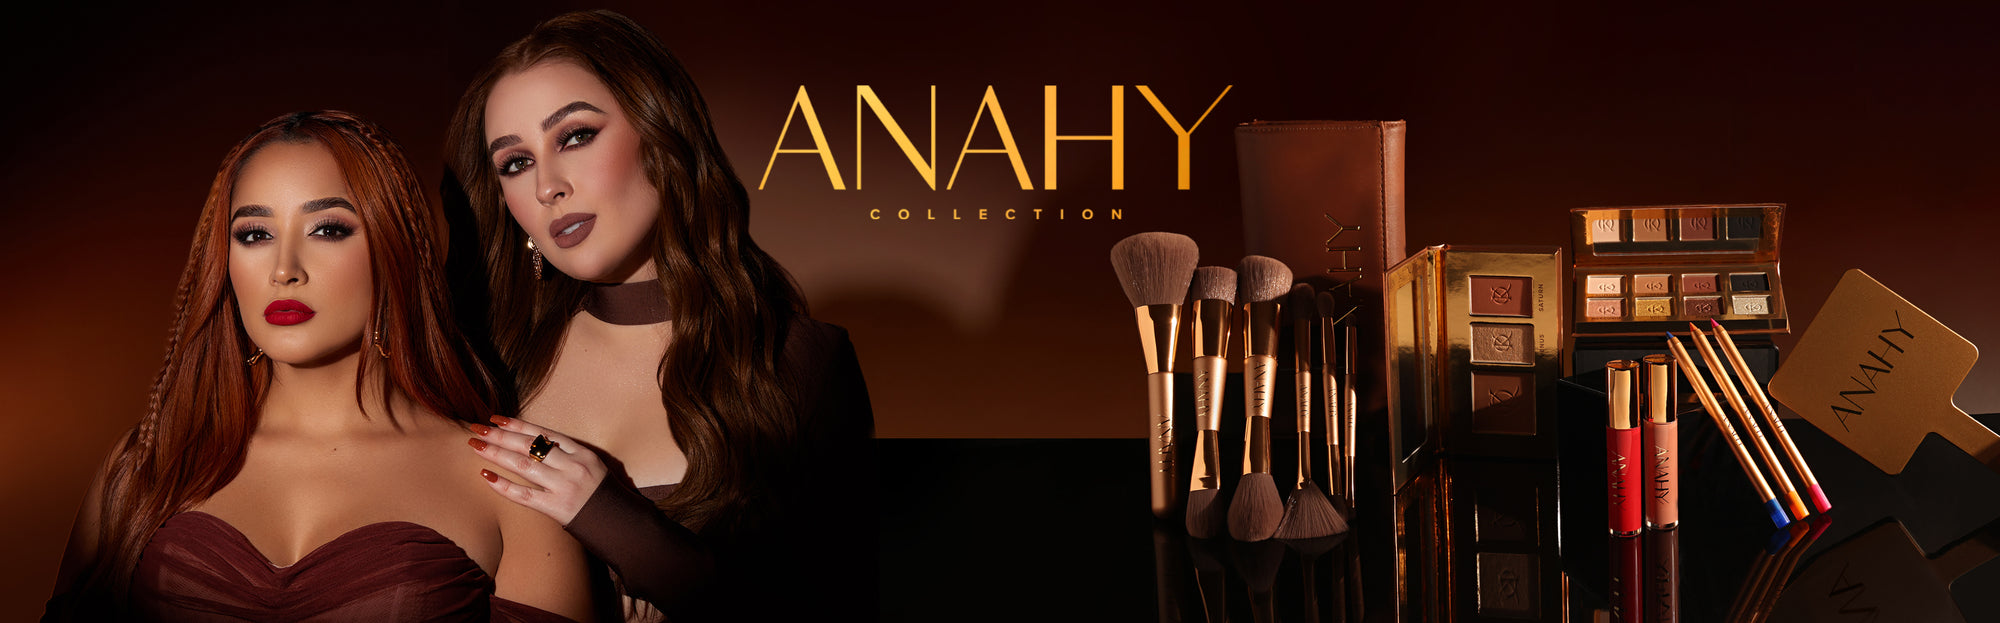 Anahy Collection